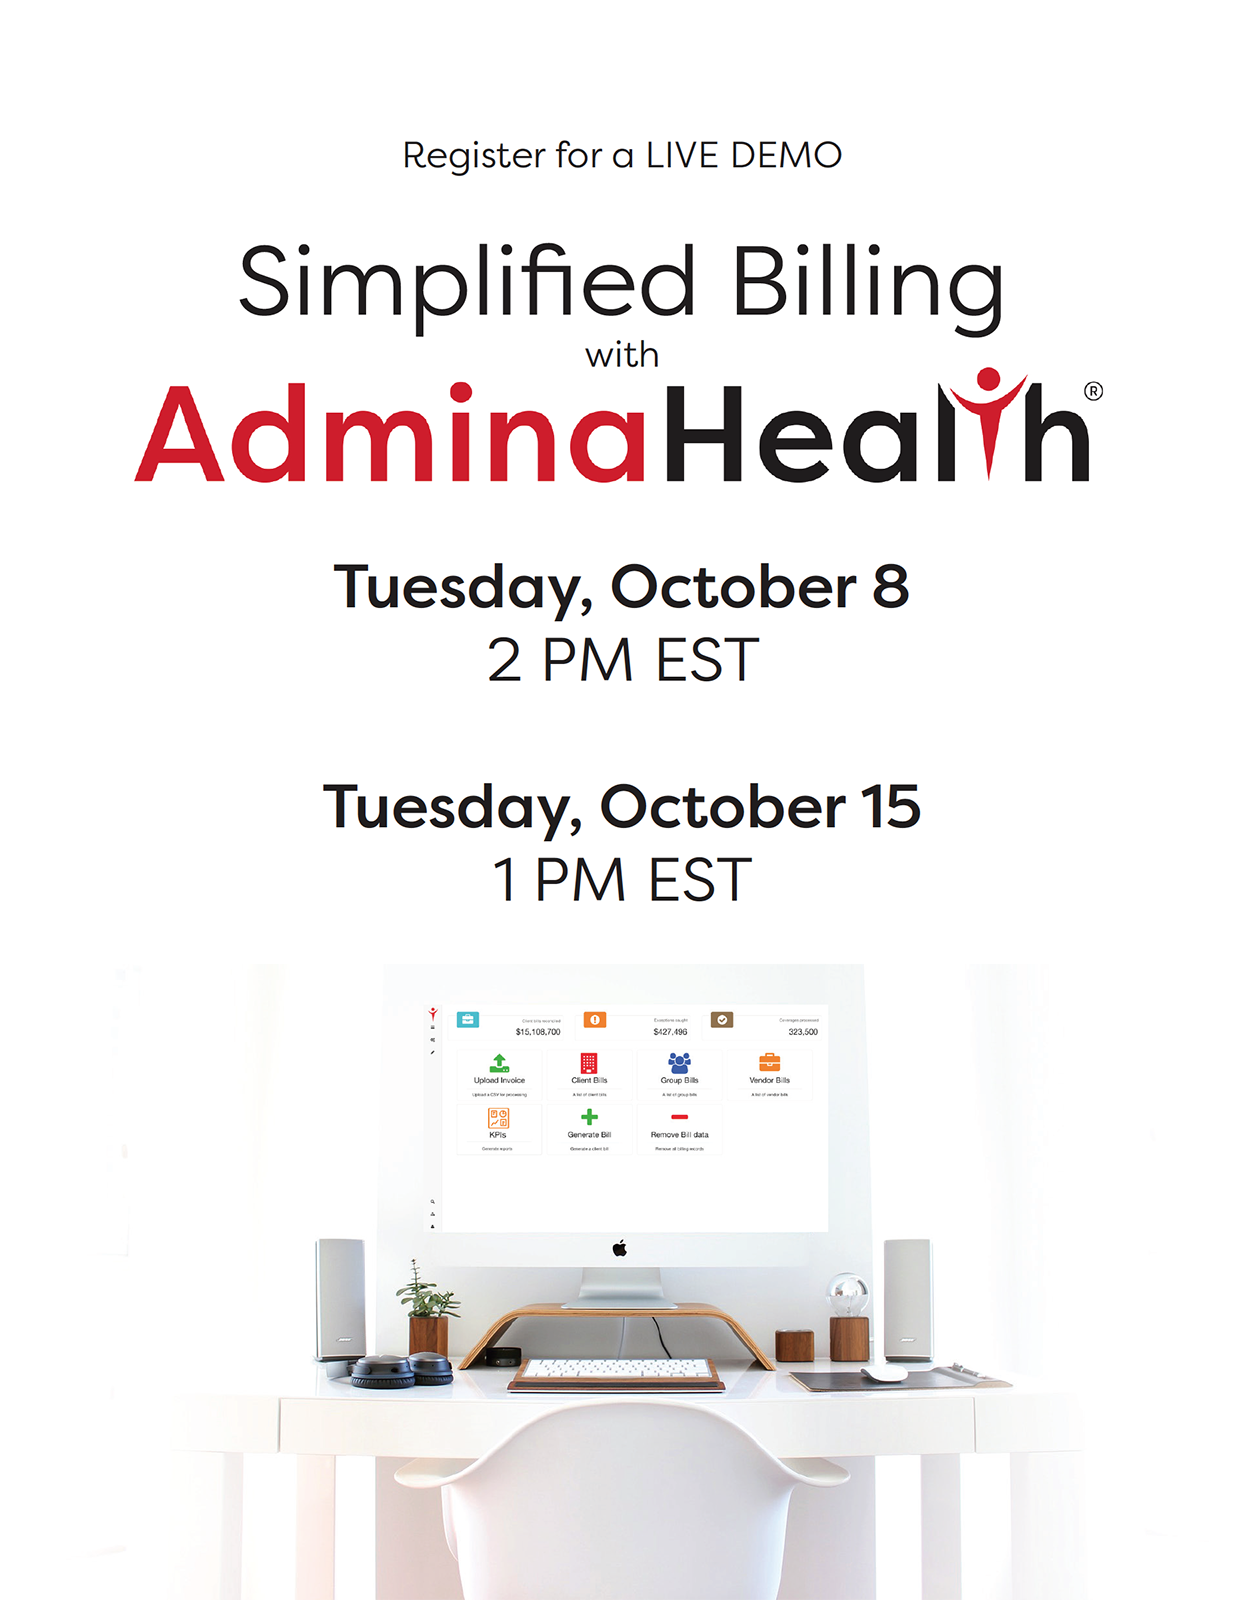 Upcoming Demo – Simplified Billing with AdminaHealth 10/8 & 10/15